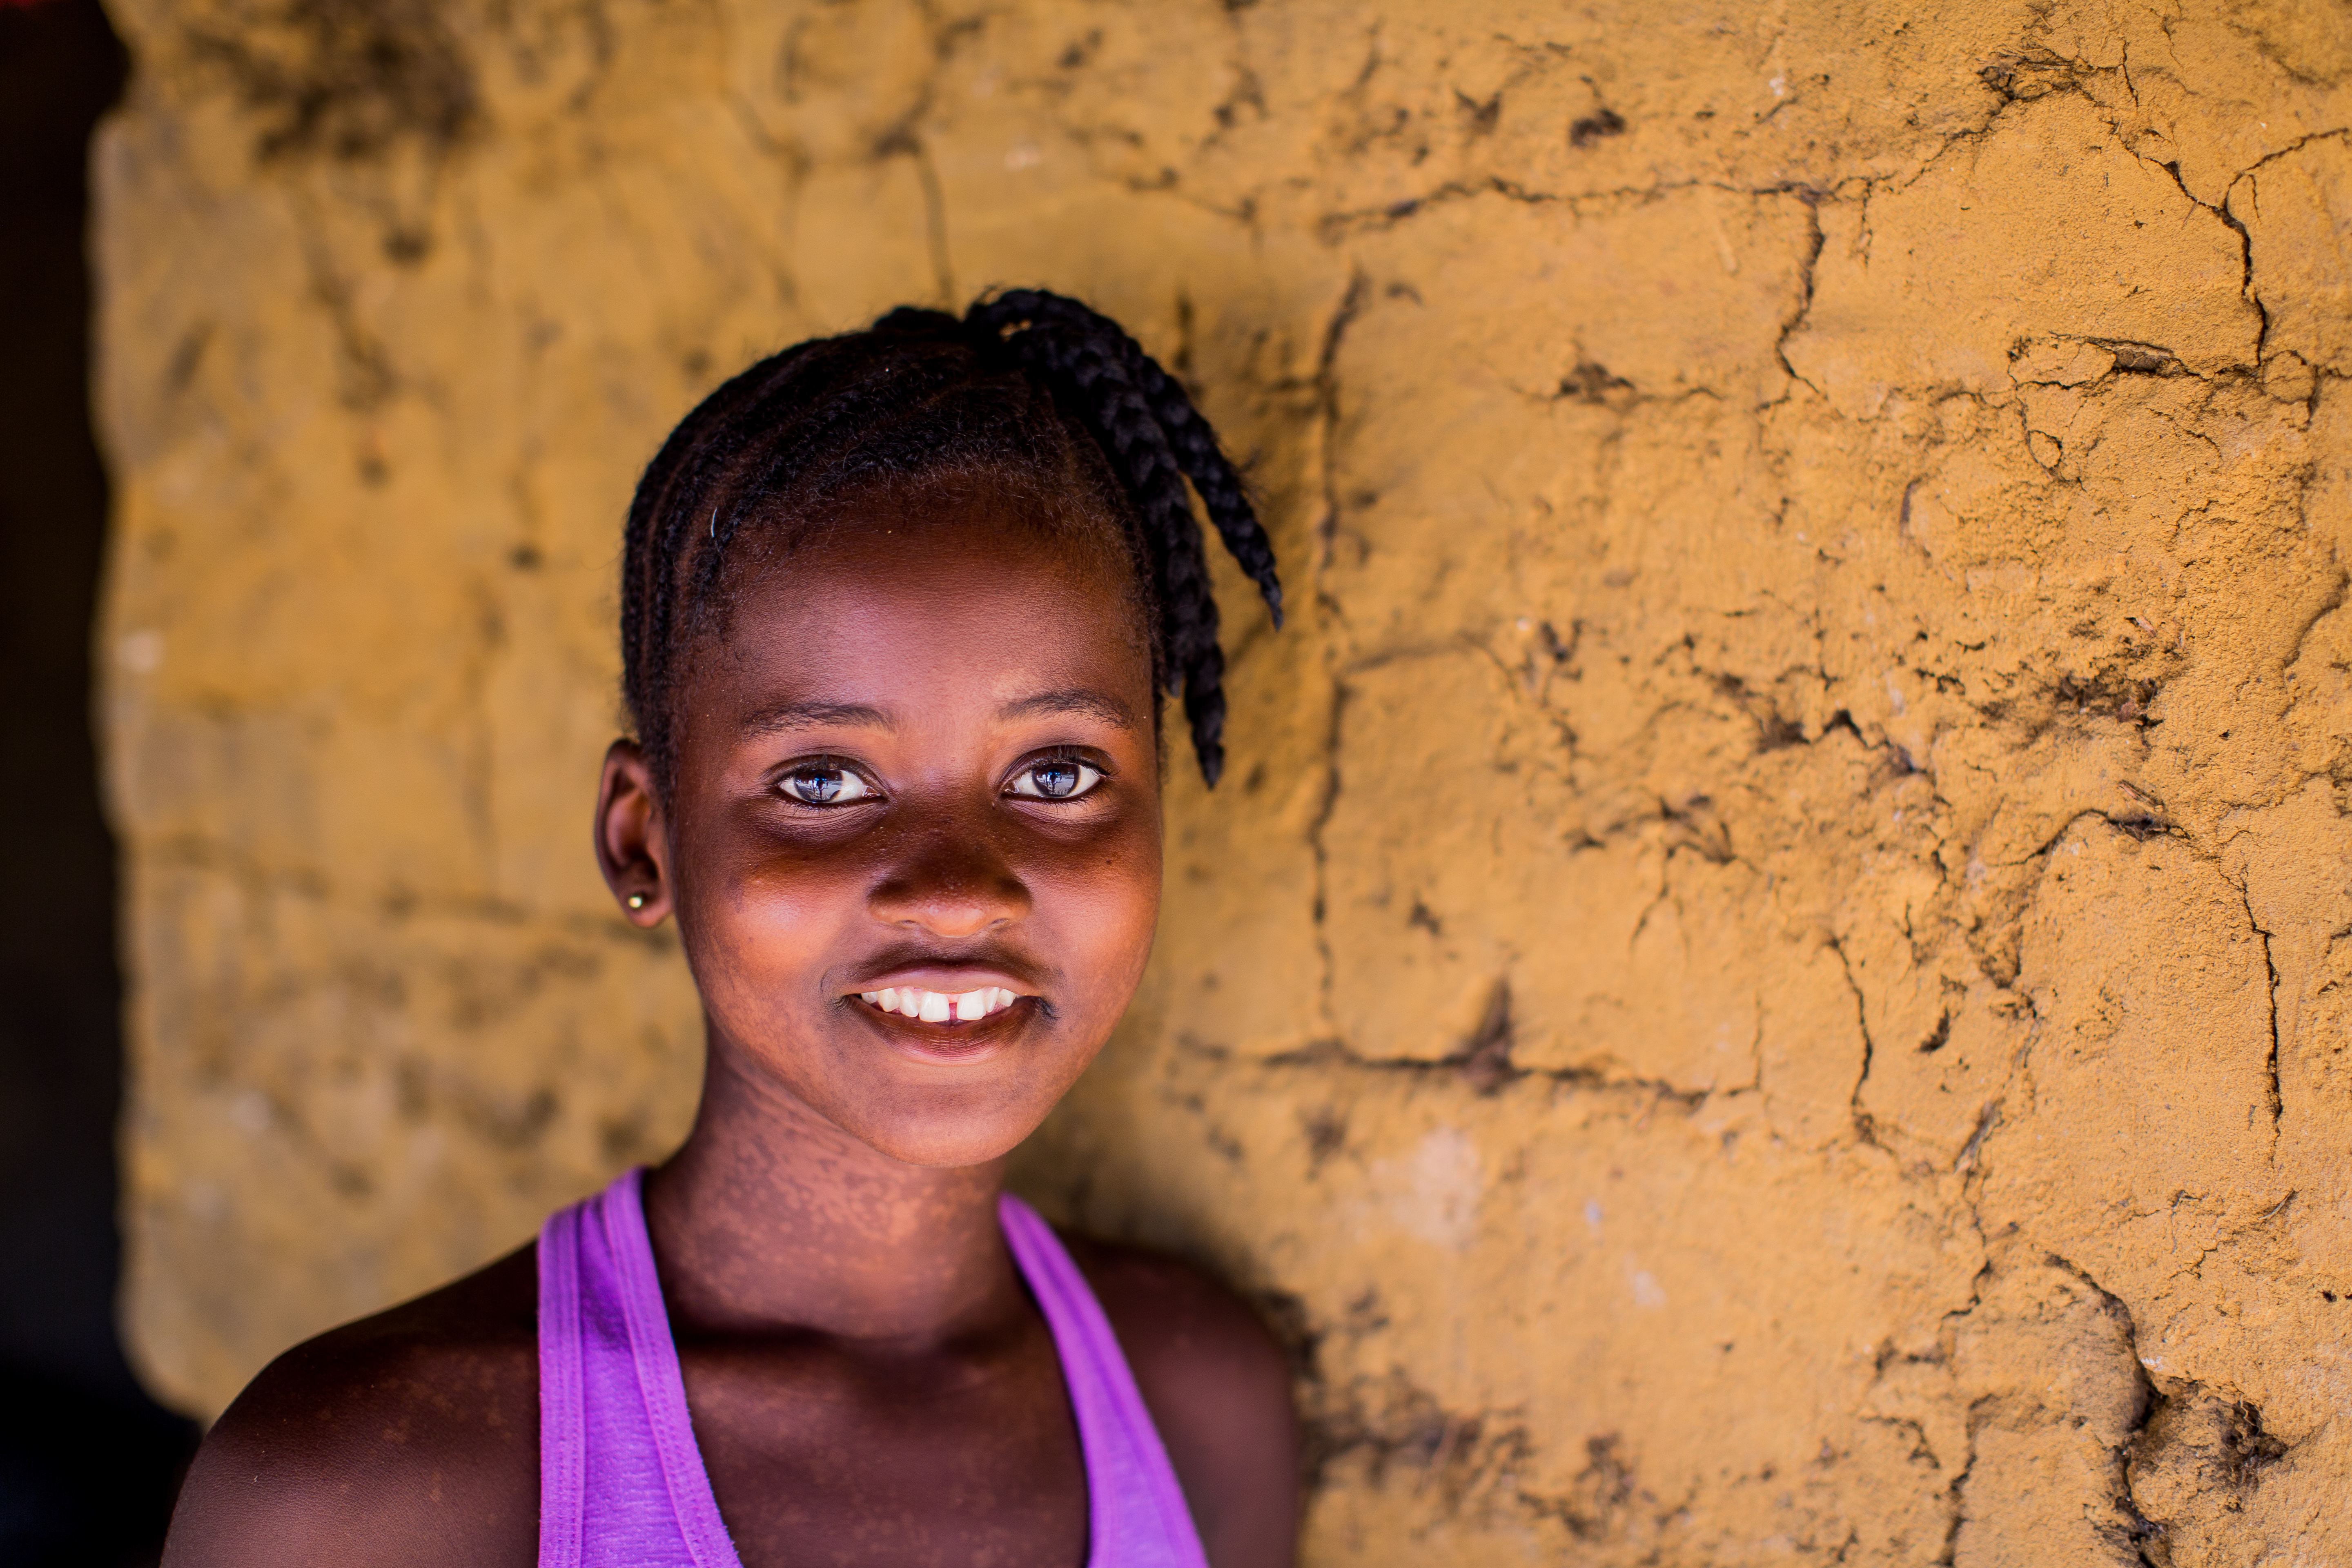 Sponsored girl in Sierra Leone smiles as she stands against a yellow wall